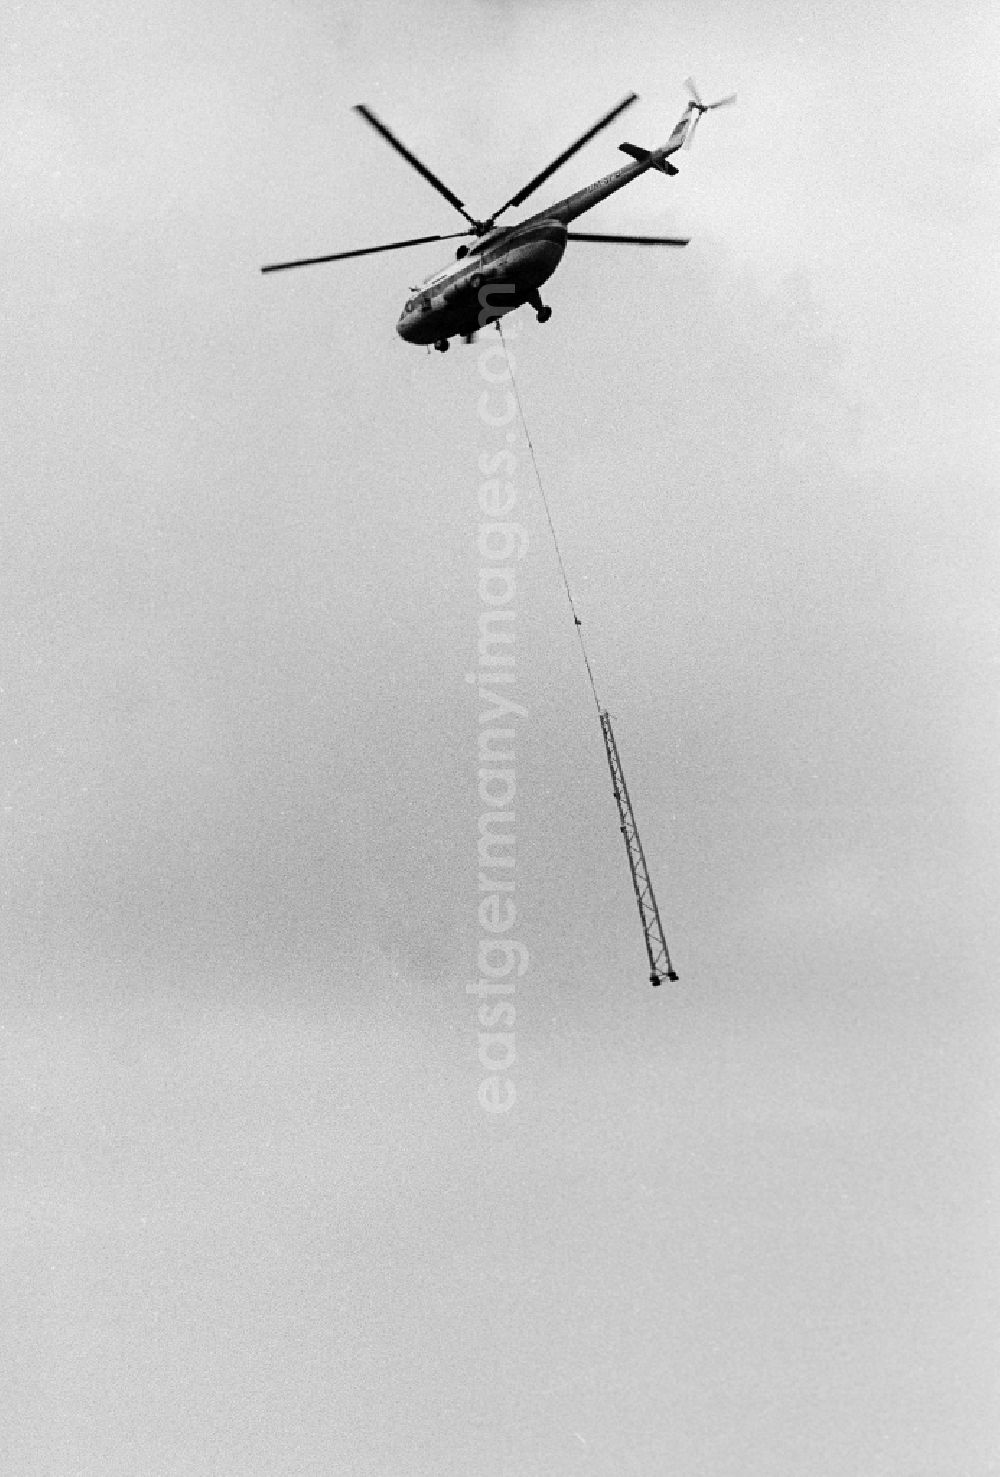 GDR picture archive: Seddiner See - A transport helicopter of the type Mi8 transports driving poles in Seddiner See in the federal state Brandenburg in the area of the former GDR, German democratic republic